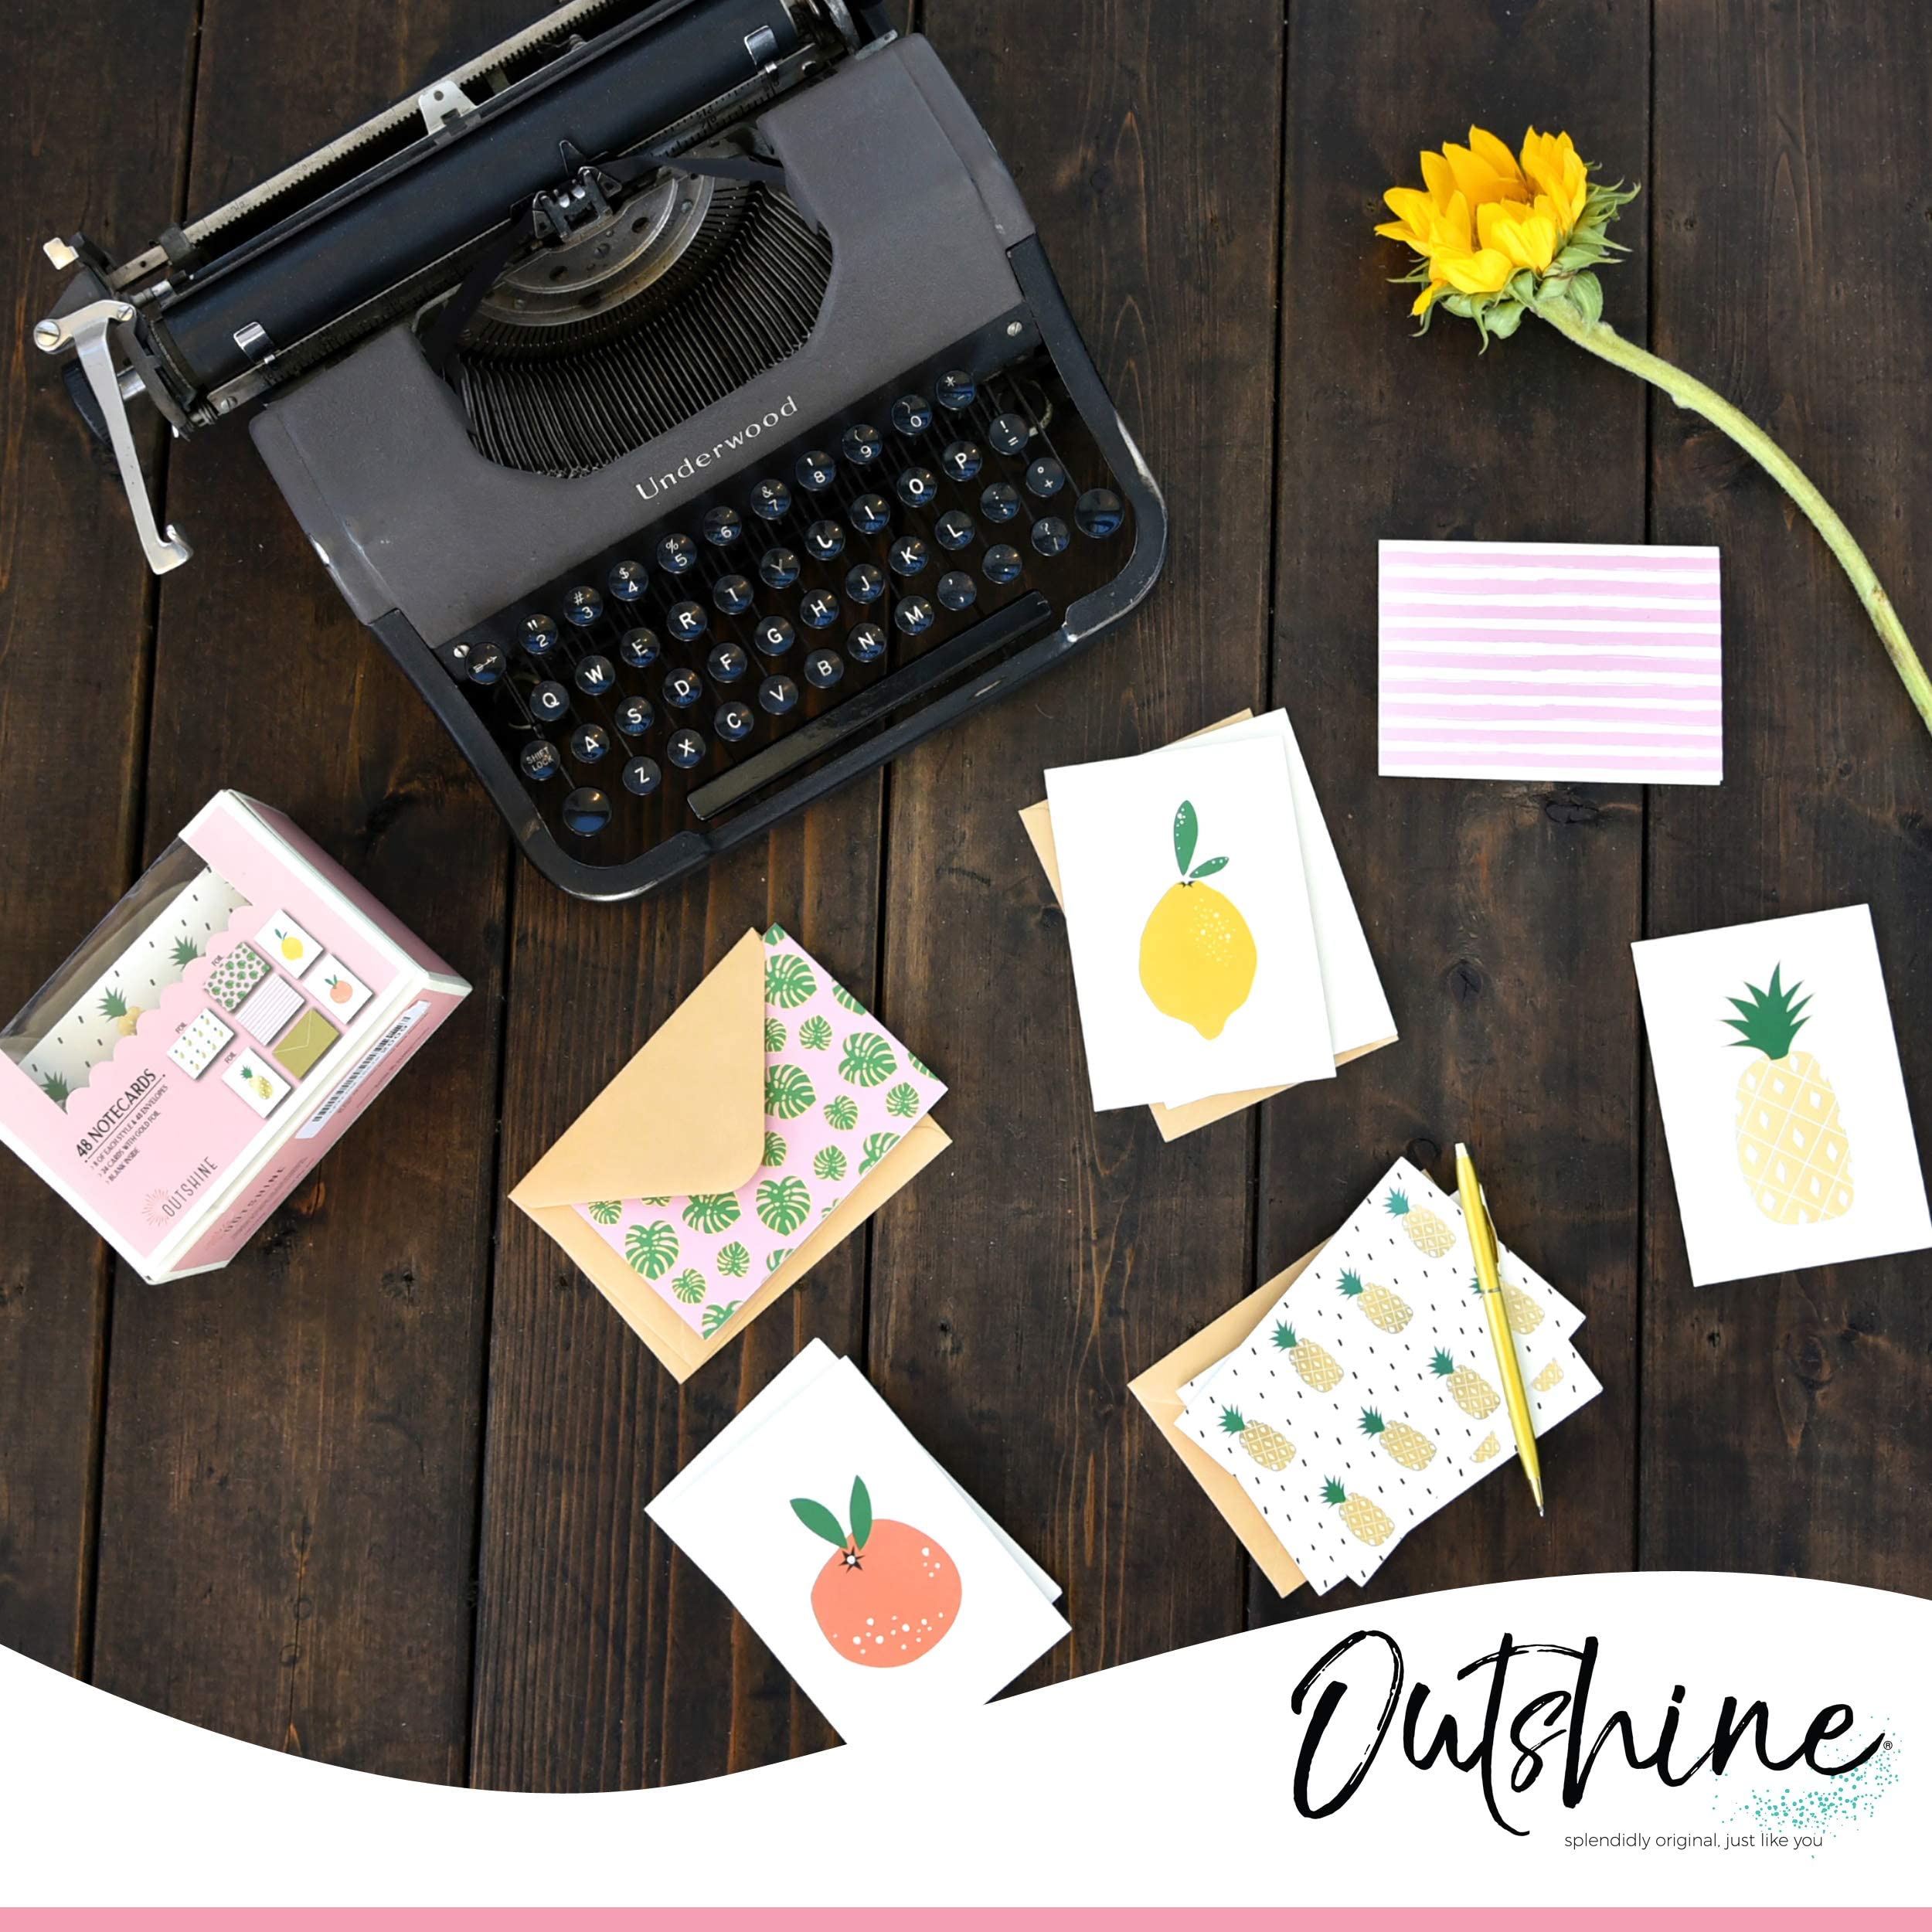 Outshine Blank Notecards and Envelopes Set in Cute Storage Box - 48 (Fruit) 3.5